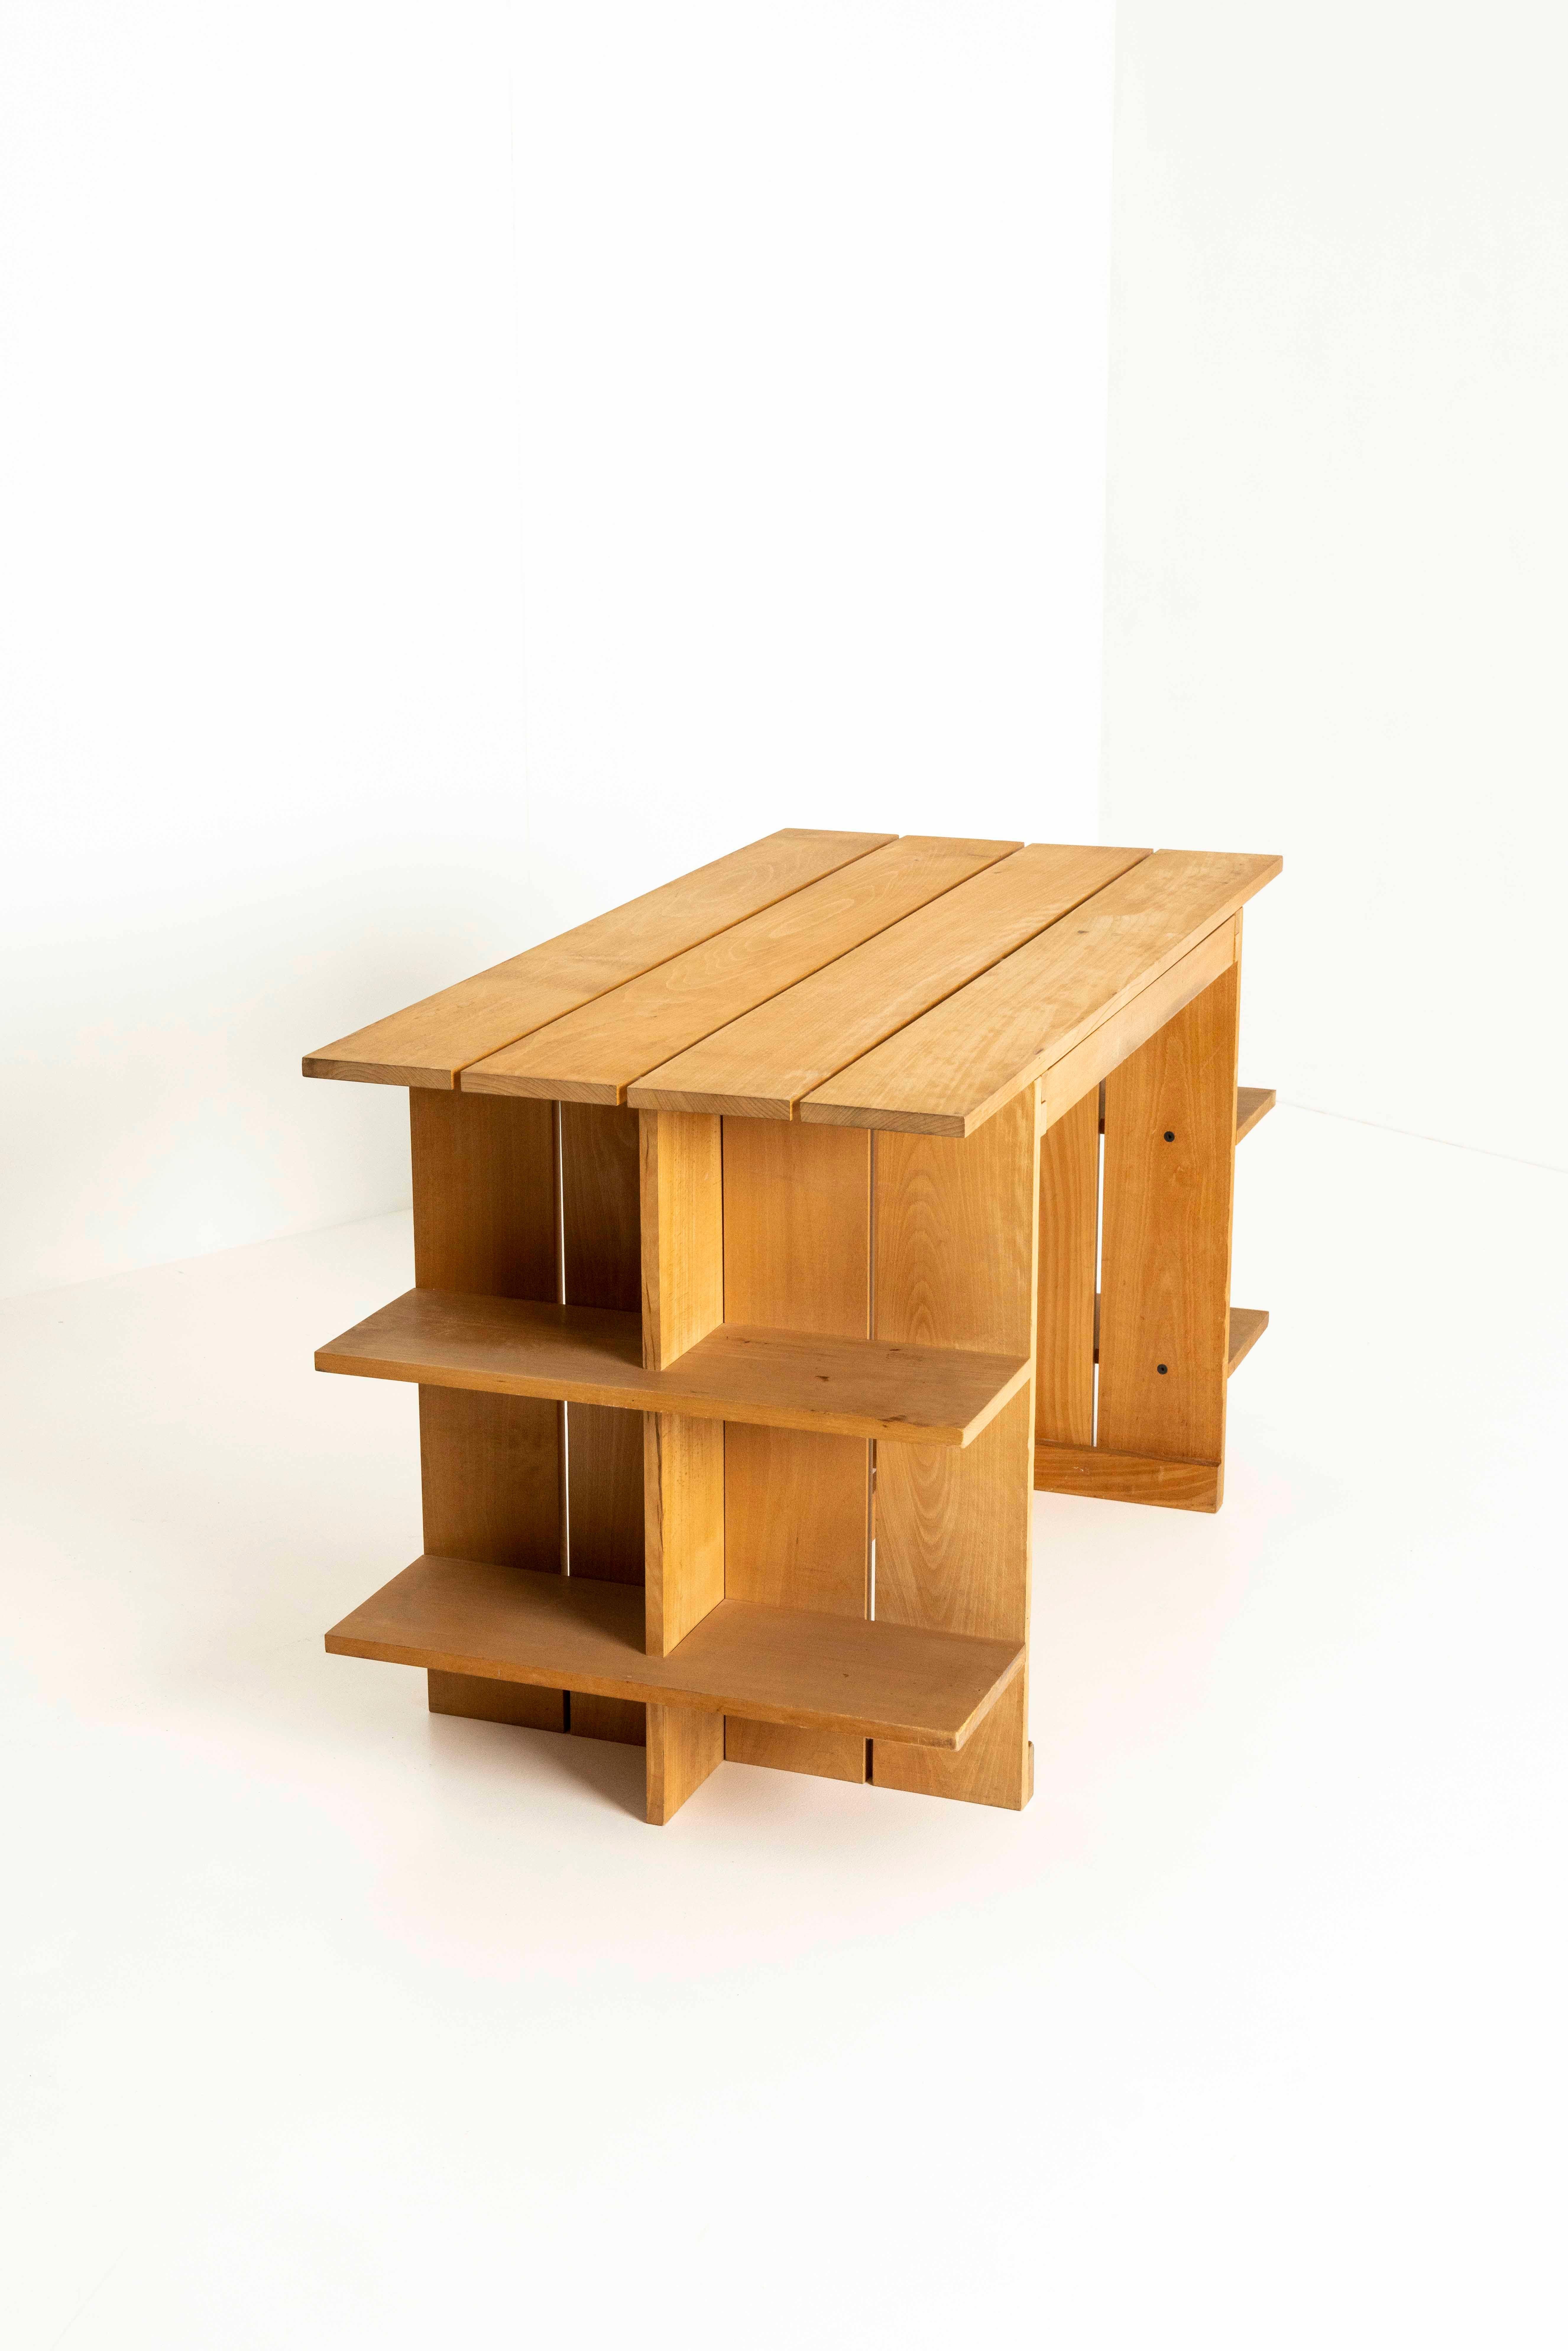 Mid-Century Modern Crate Desk by Gerrit Rietveld, Designed in 1930s The Netherlands